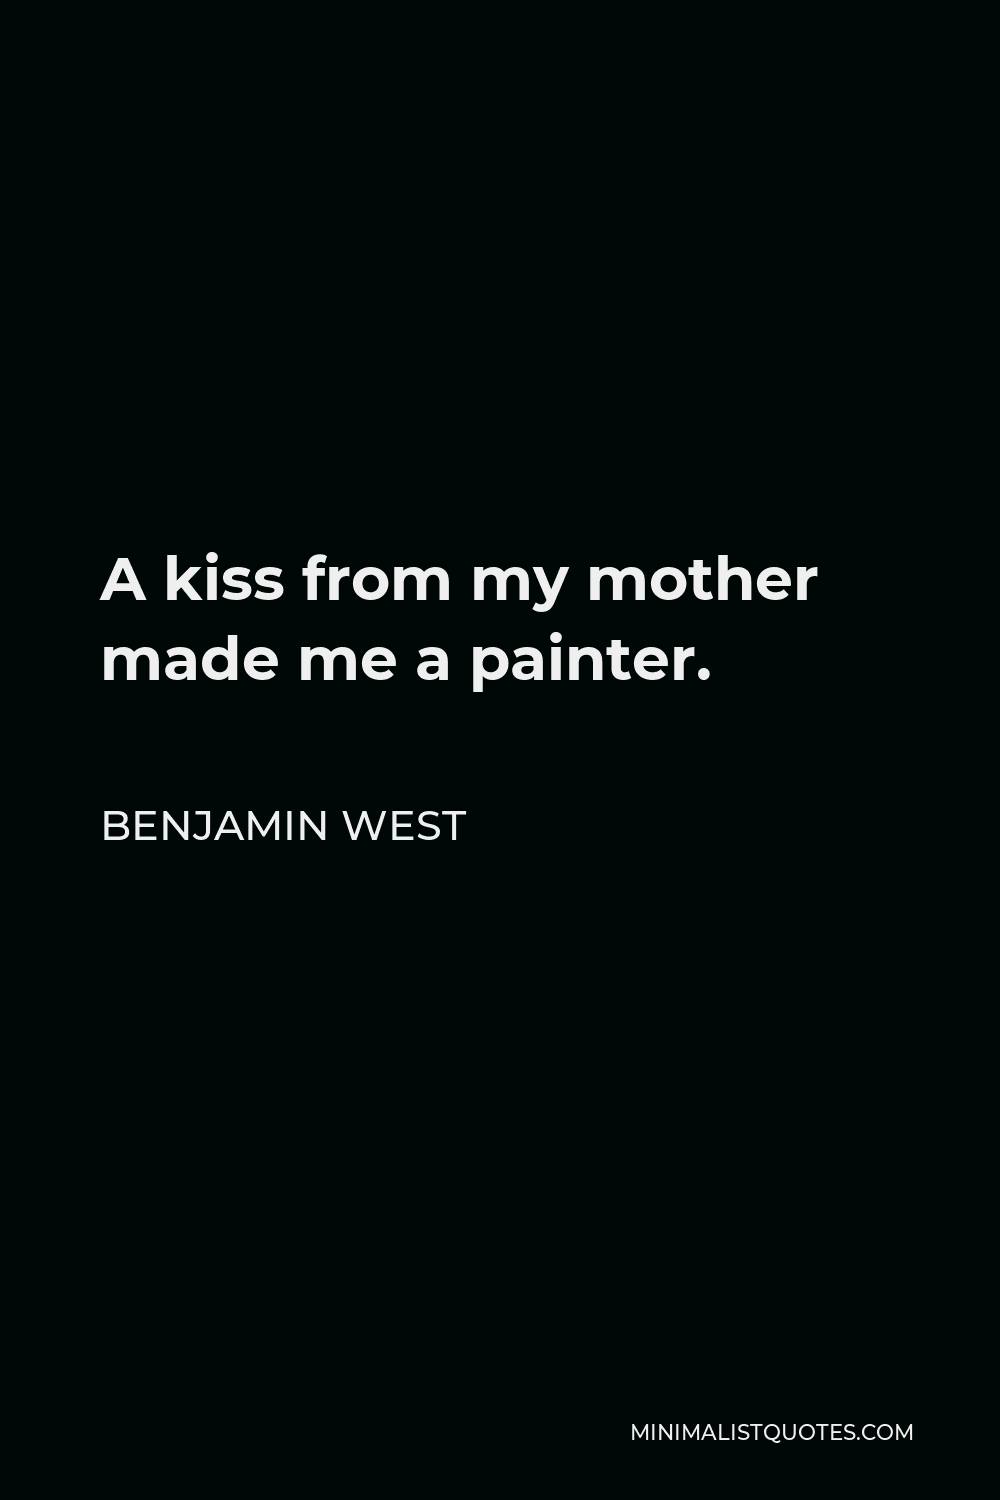 Benjamin West Quote - A kiss from my mother made me a painter.